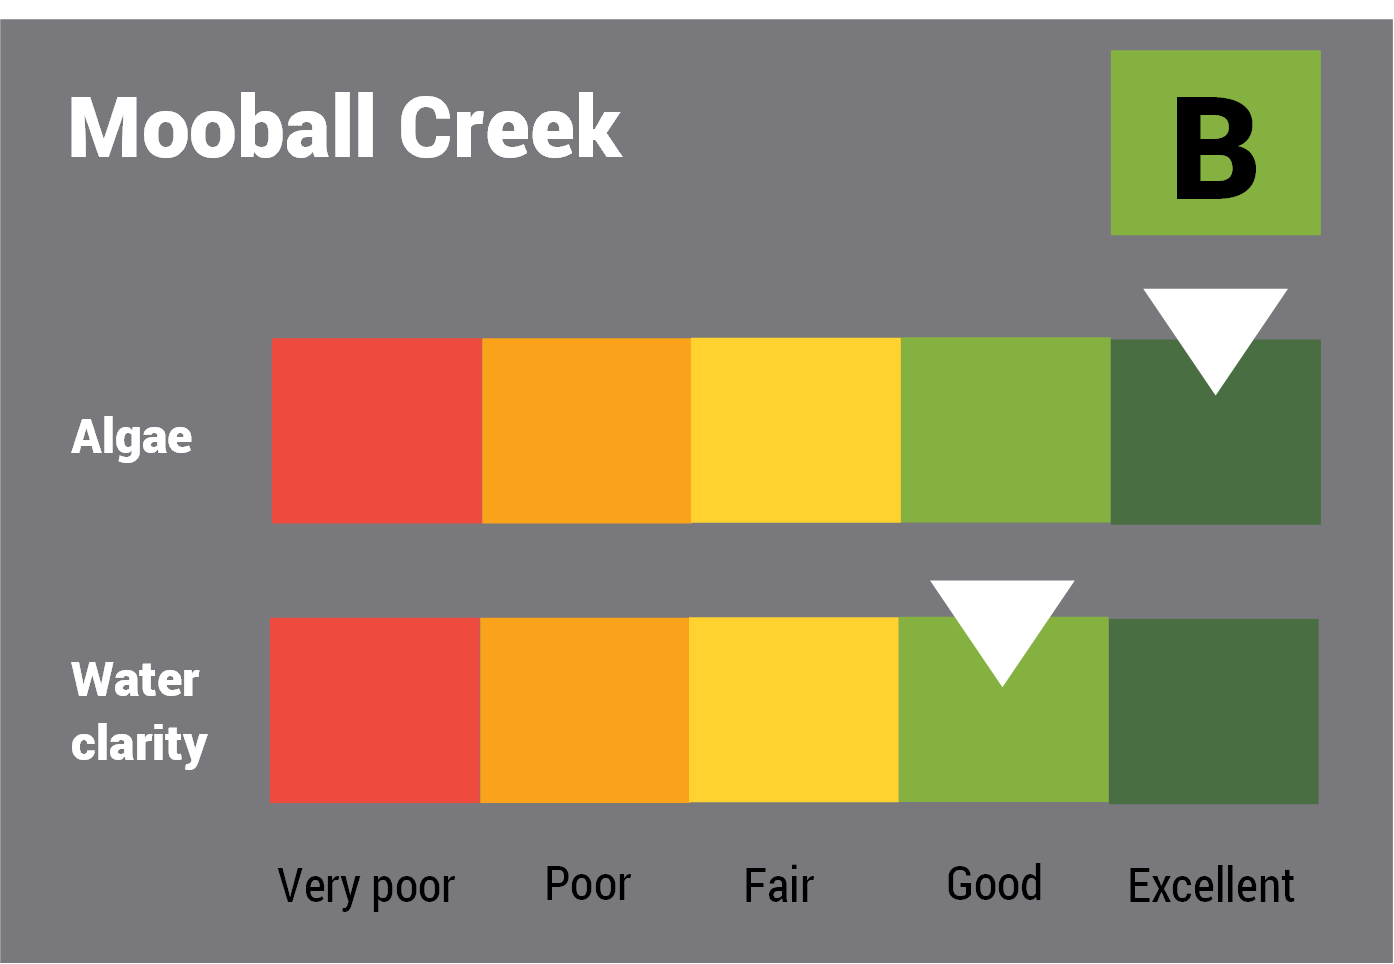 Mooball Creek water quality report card for algae and water clarity showing colour-coded ratings (red, orange, yellow, light green and dark green, which represent very poor, poor, fair, good and excellent, respectively). Algae is rated 'good' and water clarity is rated 'good' giving an overall rating of 'good' or 'B'.